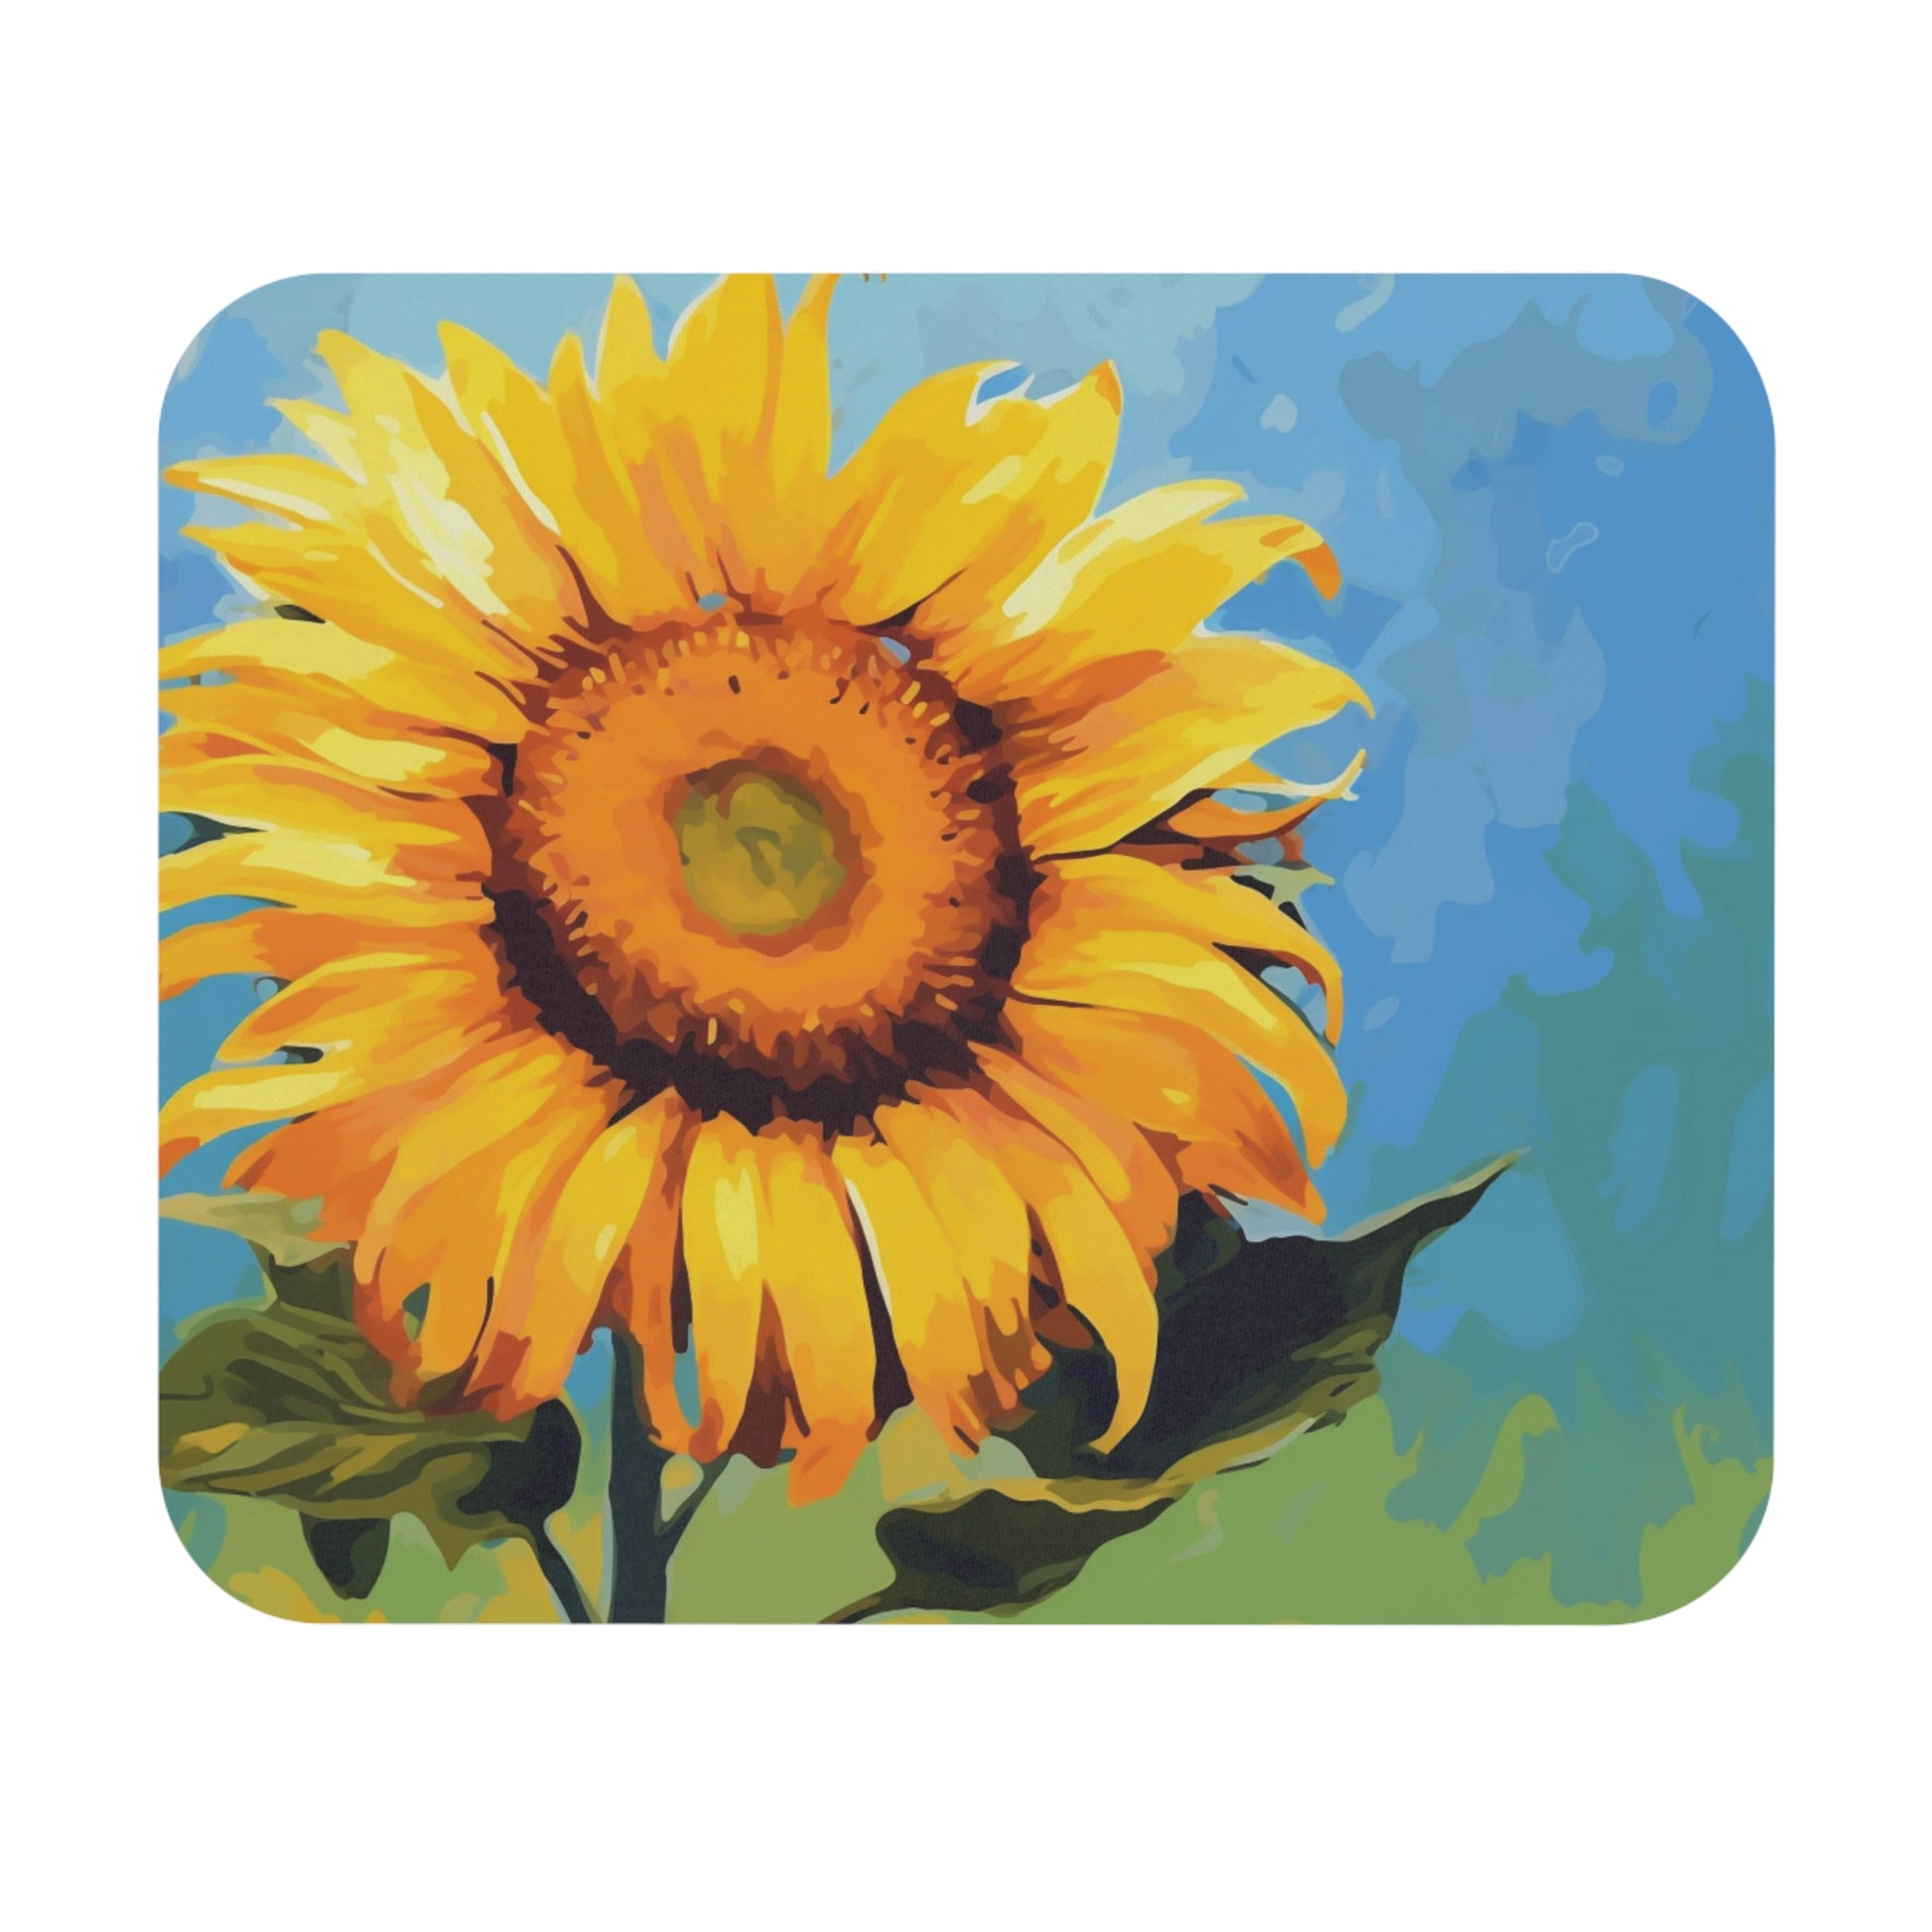 Sunflower Mouse Pad, Yellow Flower Art Computer Gaming Unique Desk Cool Decorative Aesthetic Design Square Mat Starcove Fashion